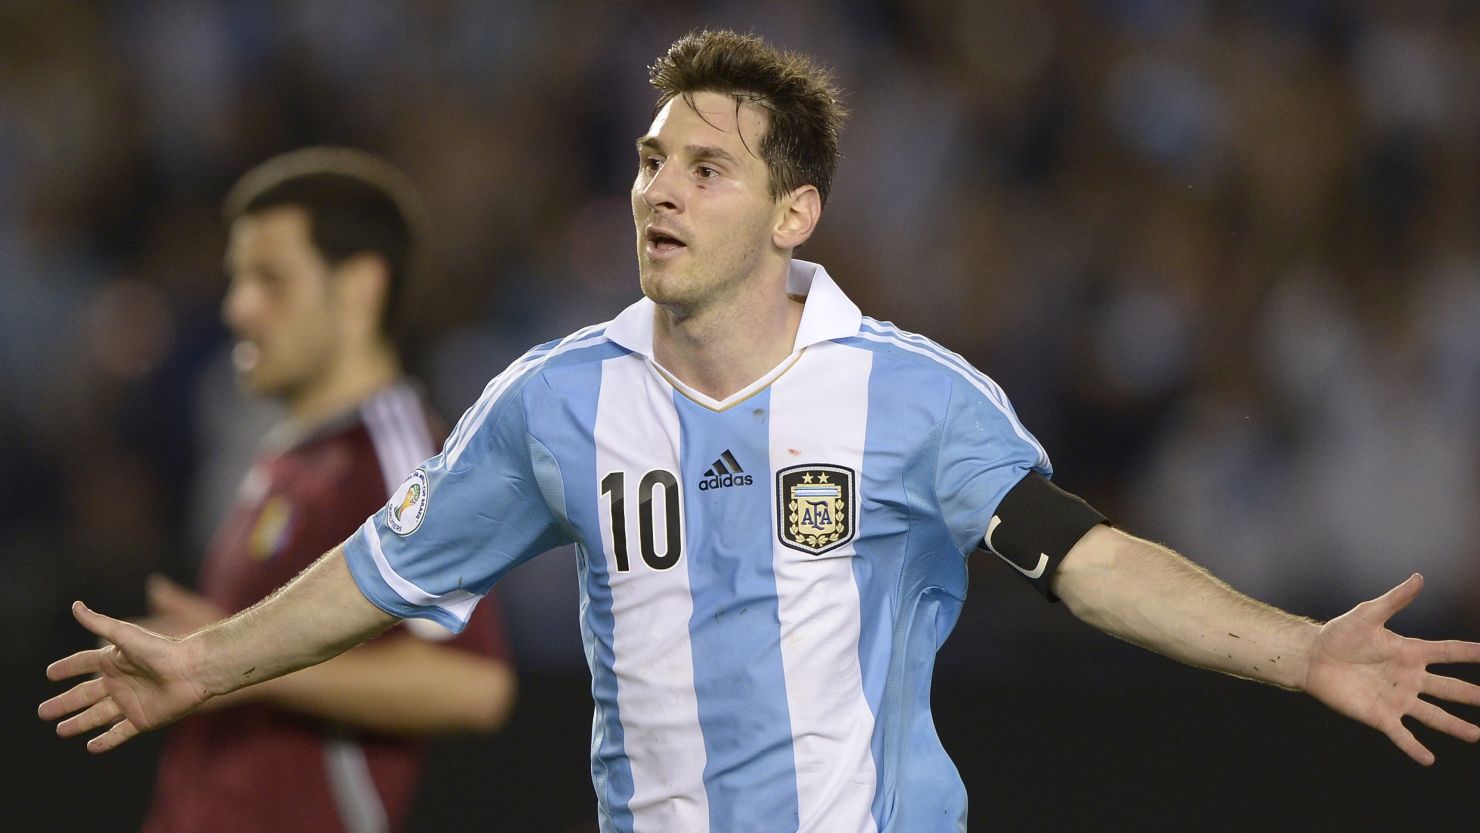 Lionel Messi was on target as Argentina defeated Venezuela 3-0 in Buenos Aires.